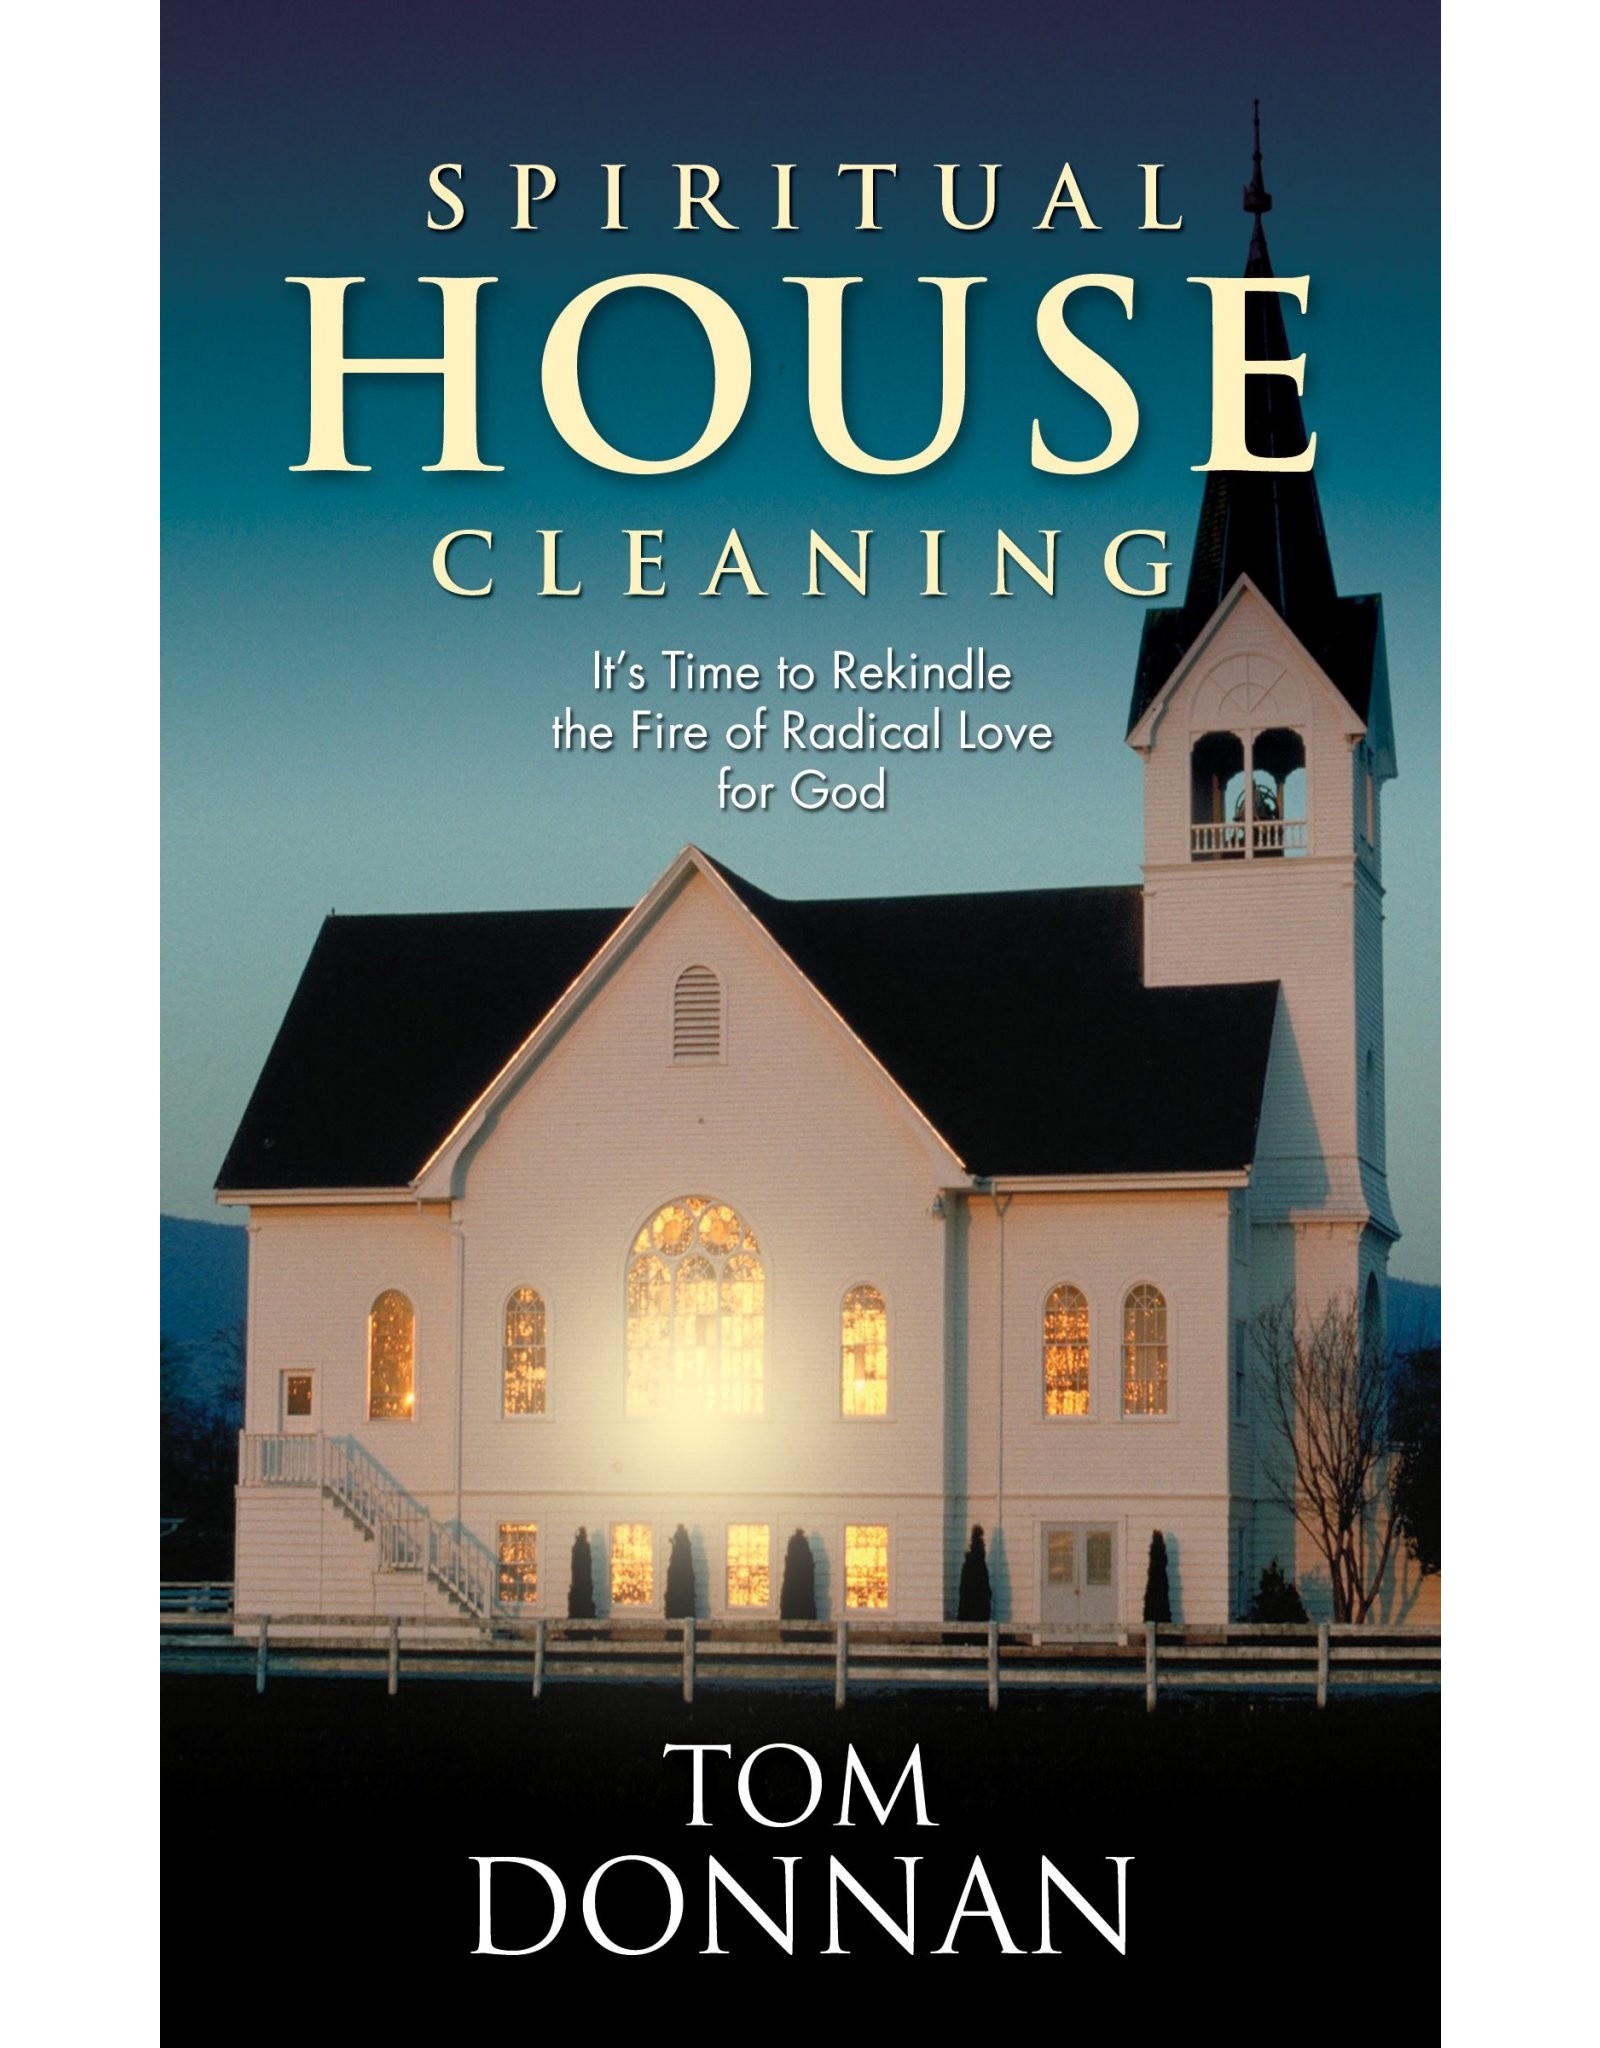 Spiritual House Cleaning by Tom Donnan (Paperback)